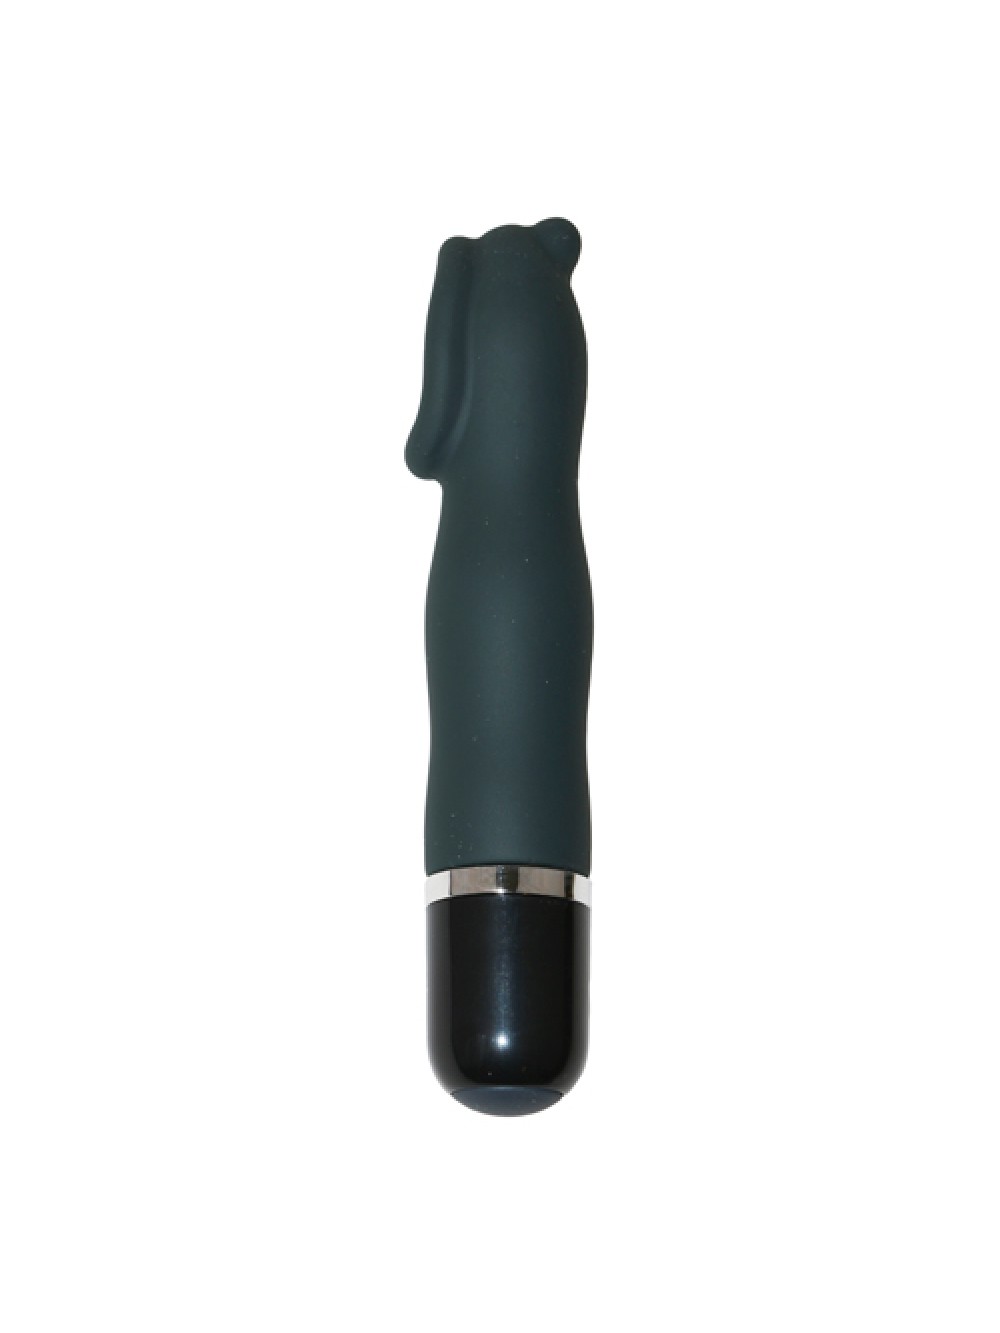 50 Shades of Grey - Sweet Touch Mini Clit Vibrator 5060057878194